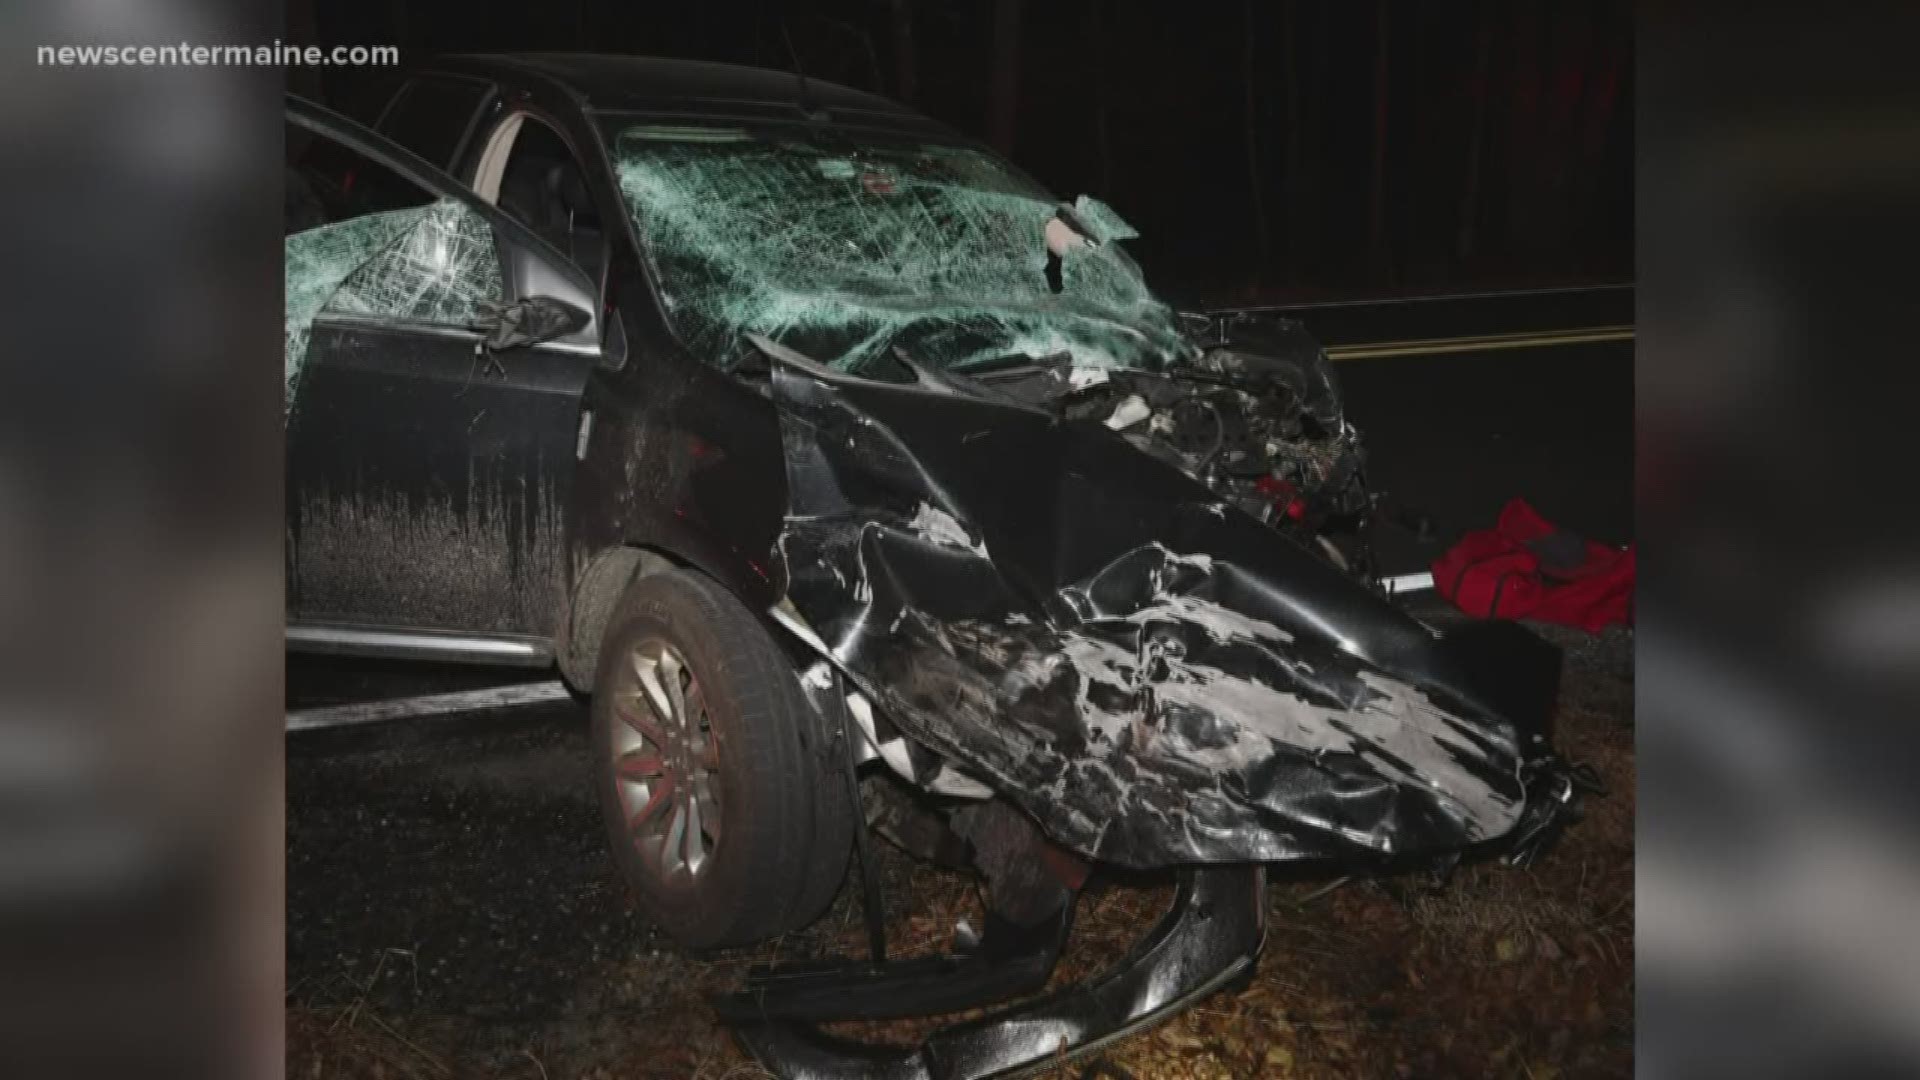 A man is facing charges after killing two people in  car crash in Litchfield.